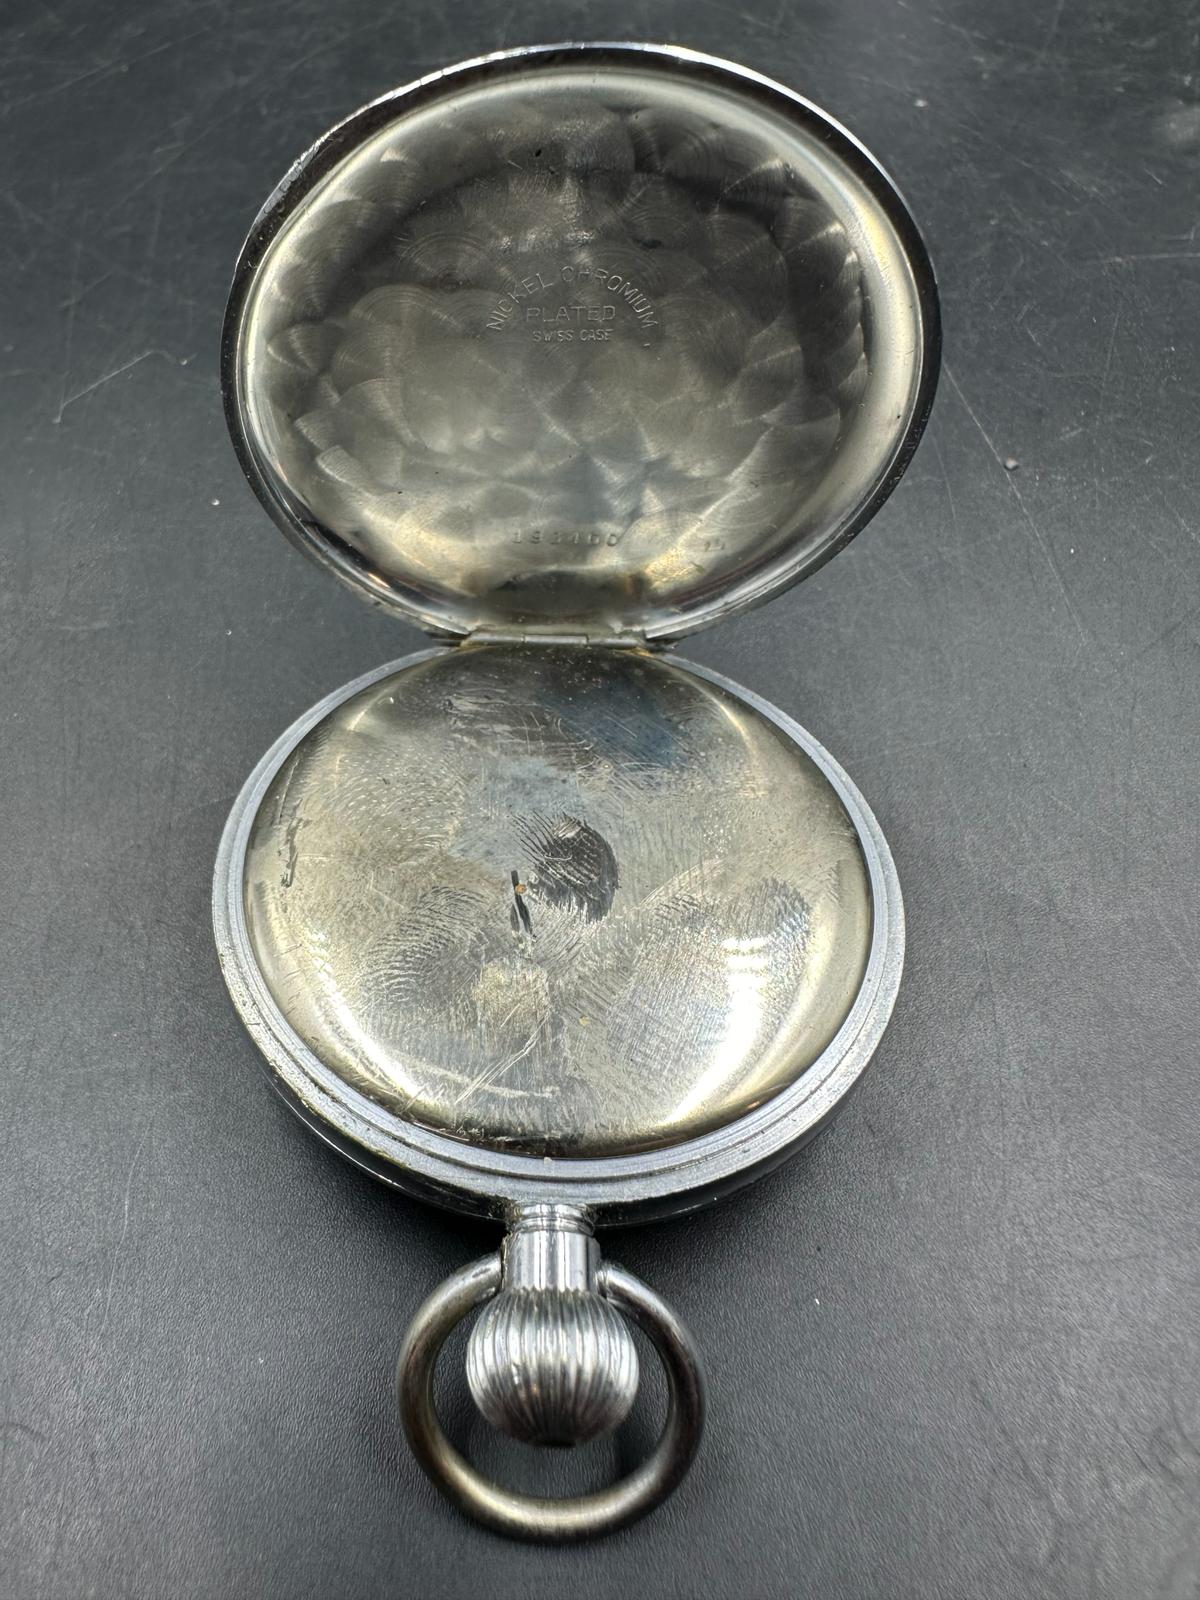 A vintage Bravingtons Renown pocket watch in a nickel chromium plated cess - Image 2 of 6